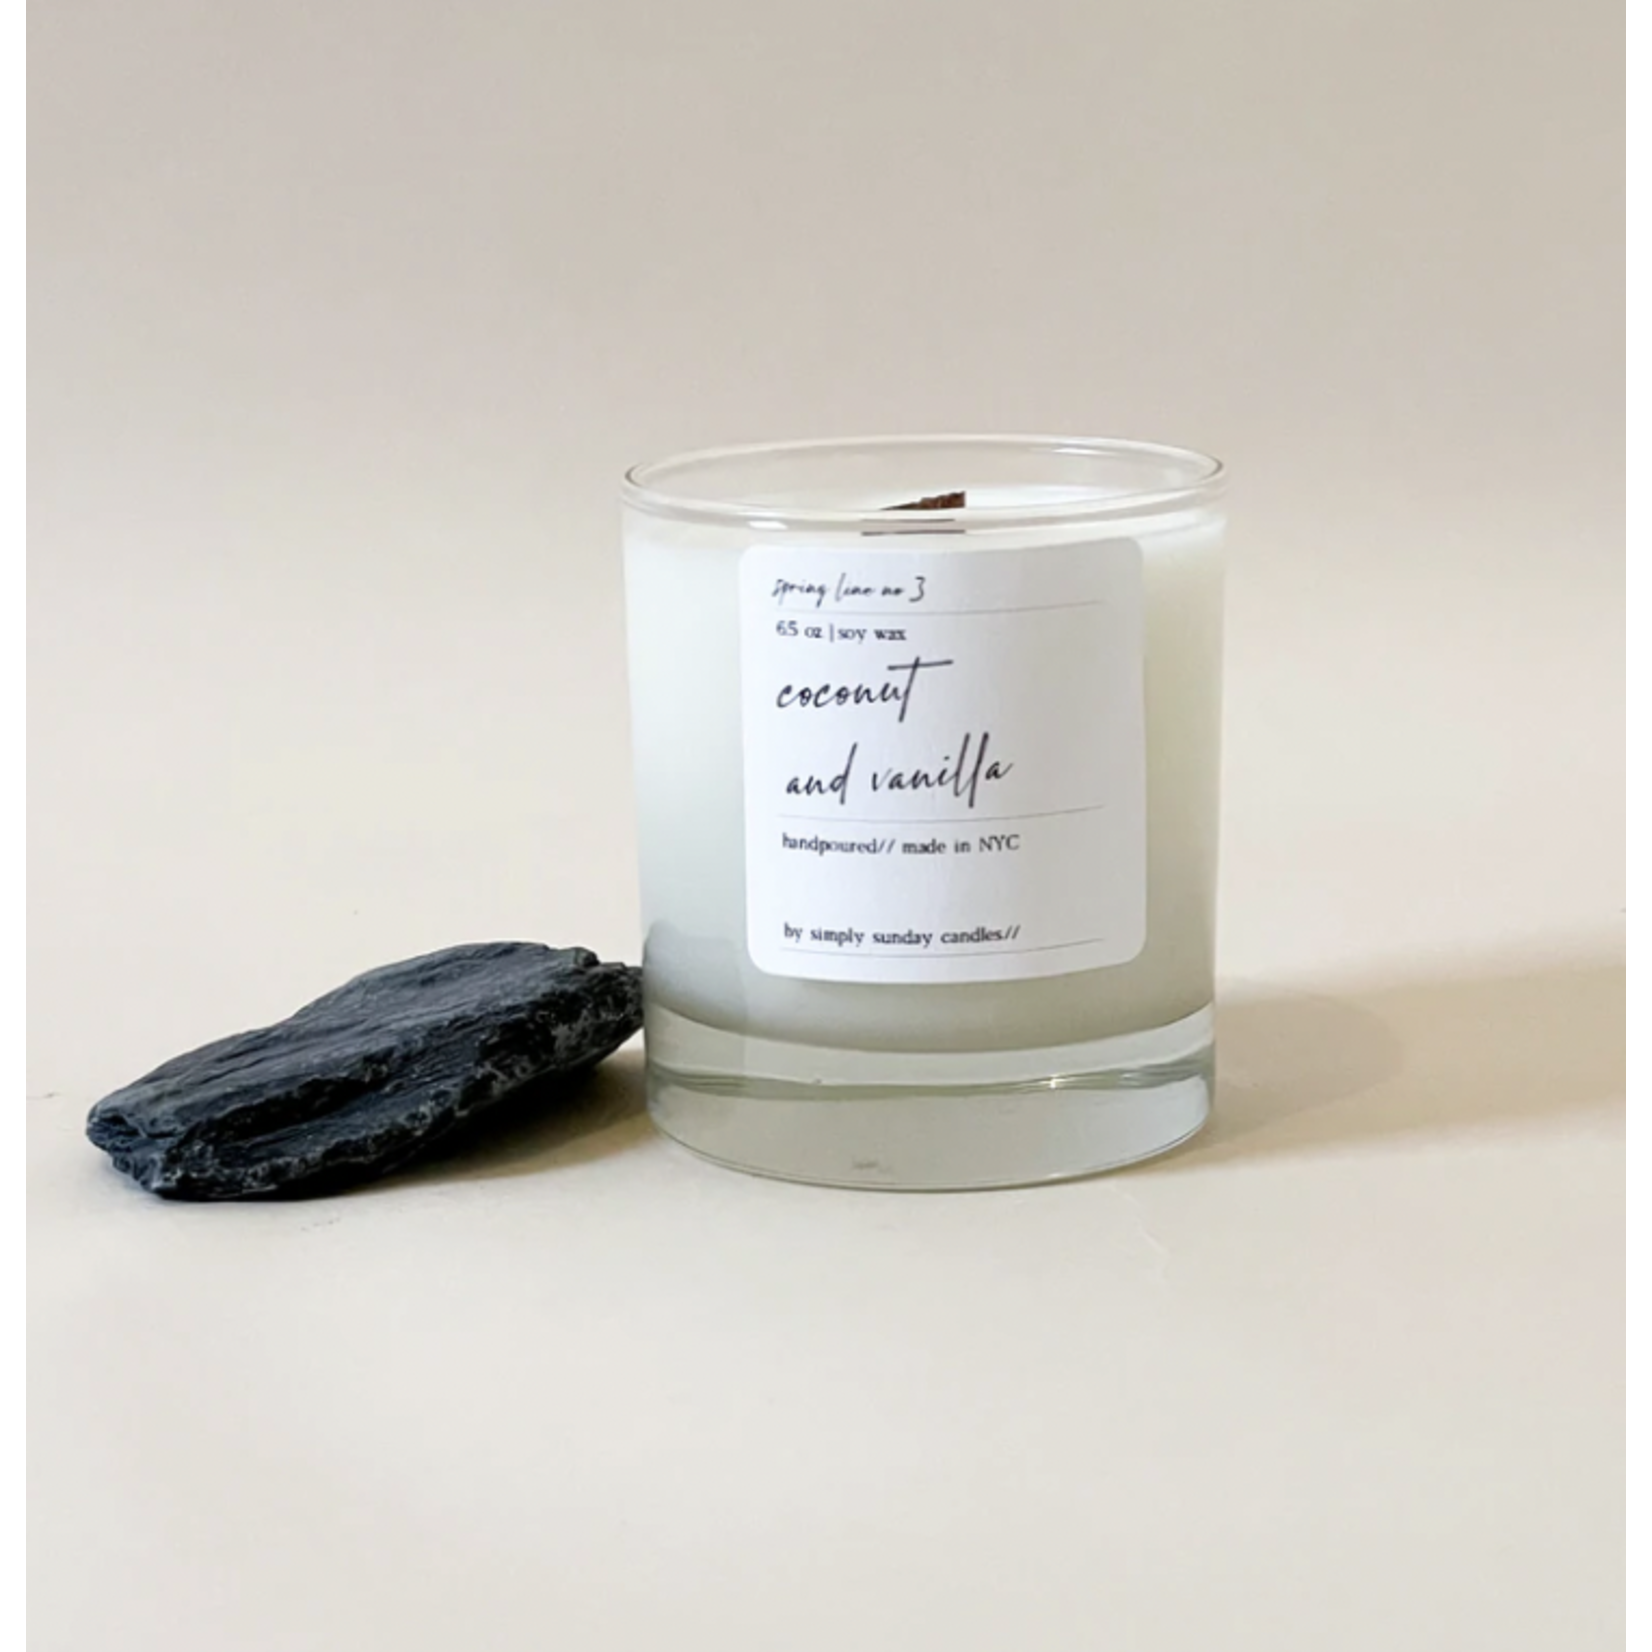 Simply Sunday Candles SP22 Coconut + Vanilla - FINAL SALE